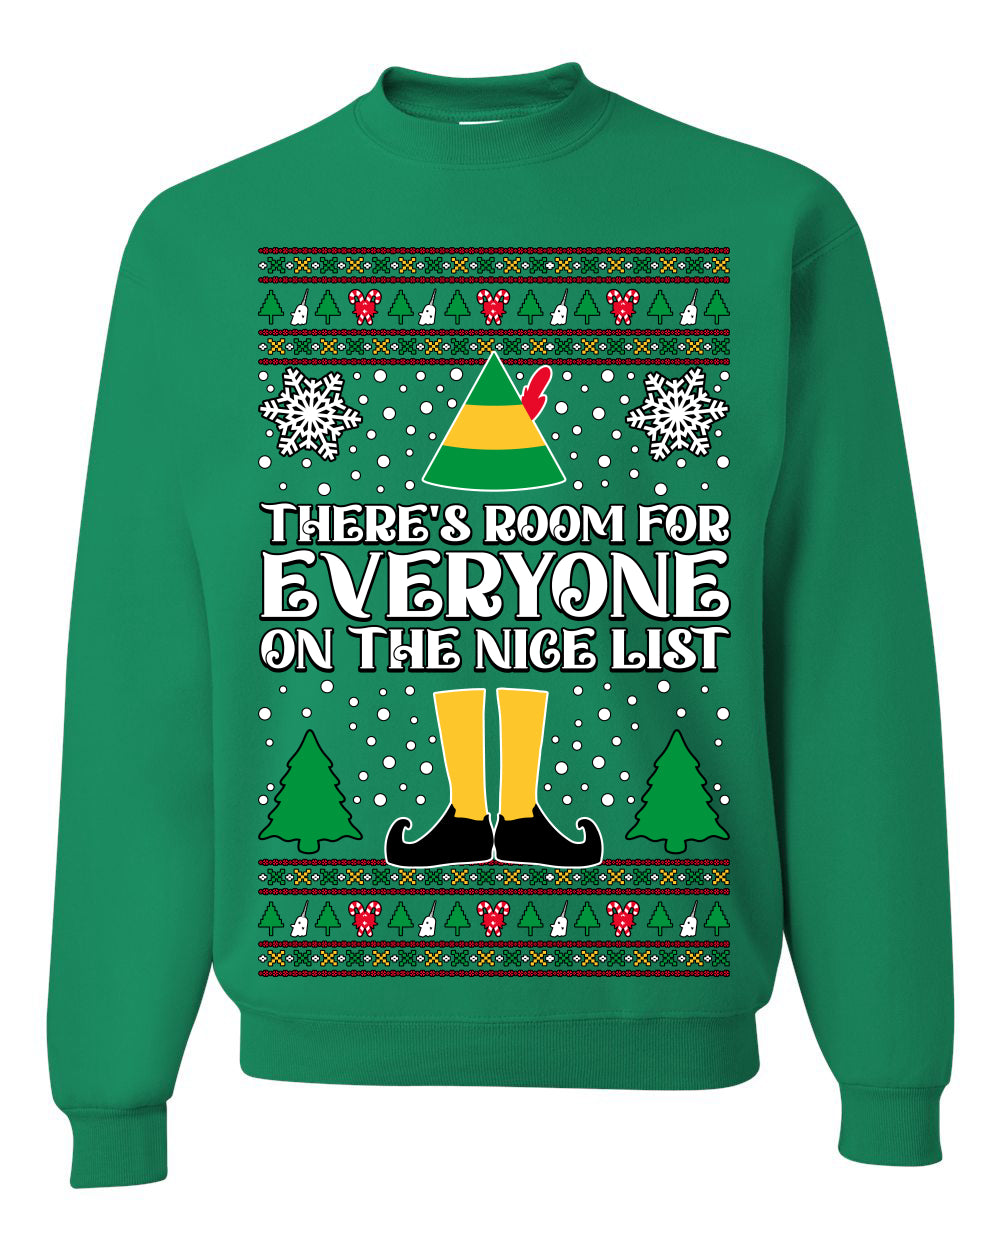 Room For Everyone On The Nice List Christmas Movie Quote  Ugly Christmas Sweater Unisex Crewneck Sweatshirt